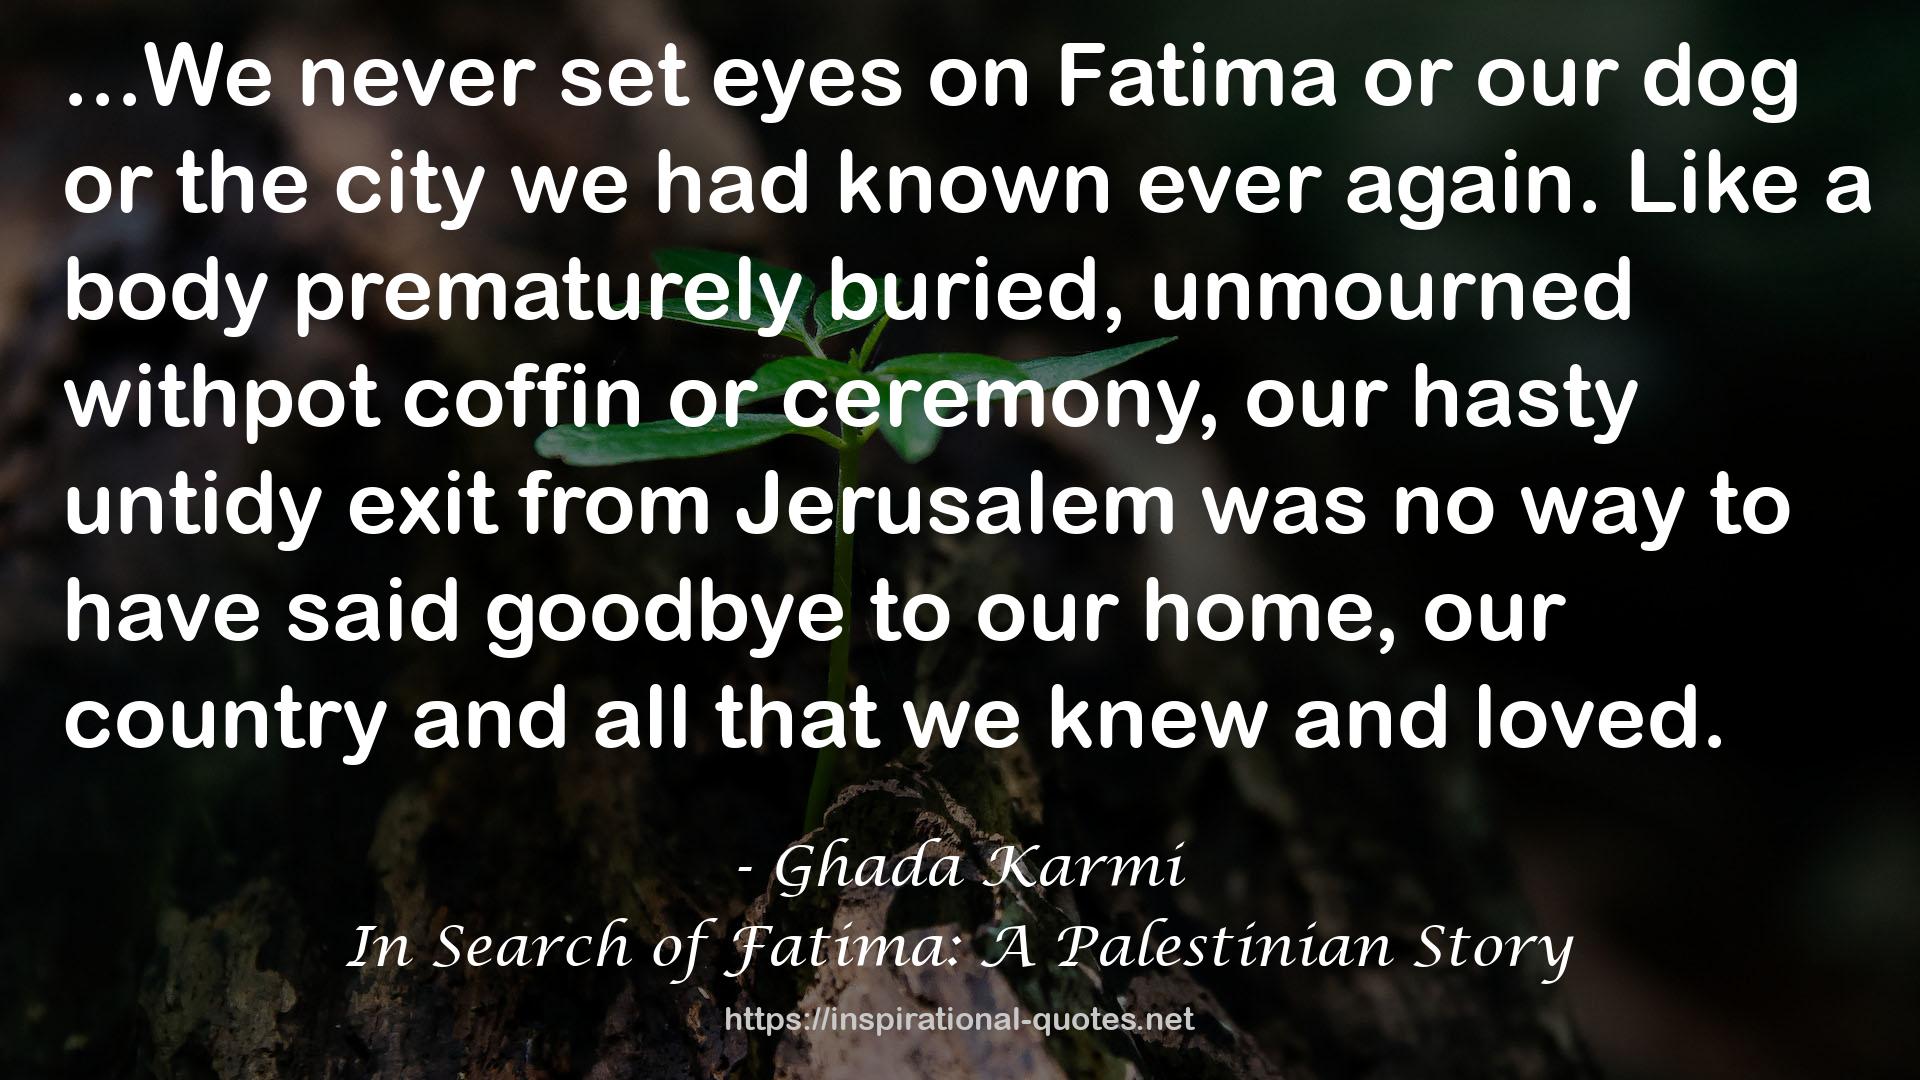 In Search of Fatima: A Palestinian Story QUOTES